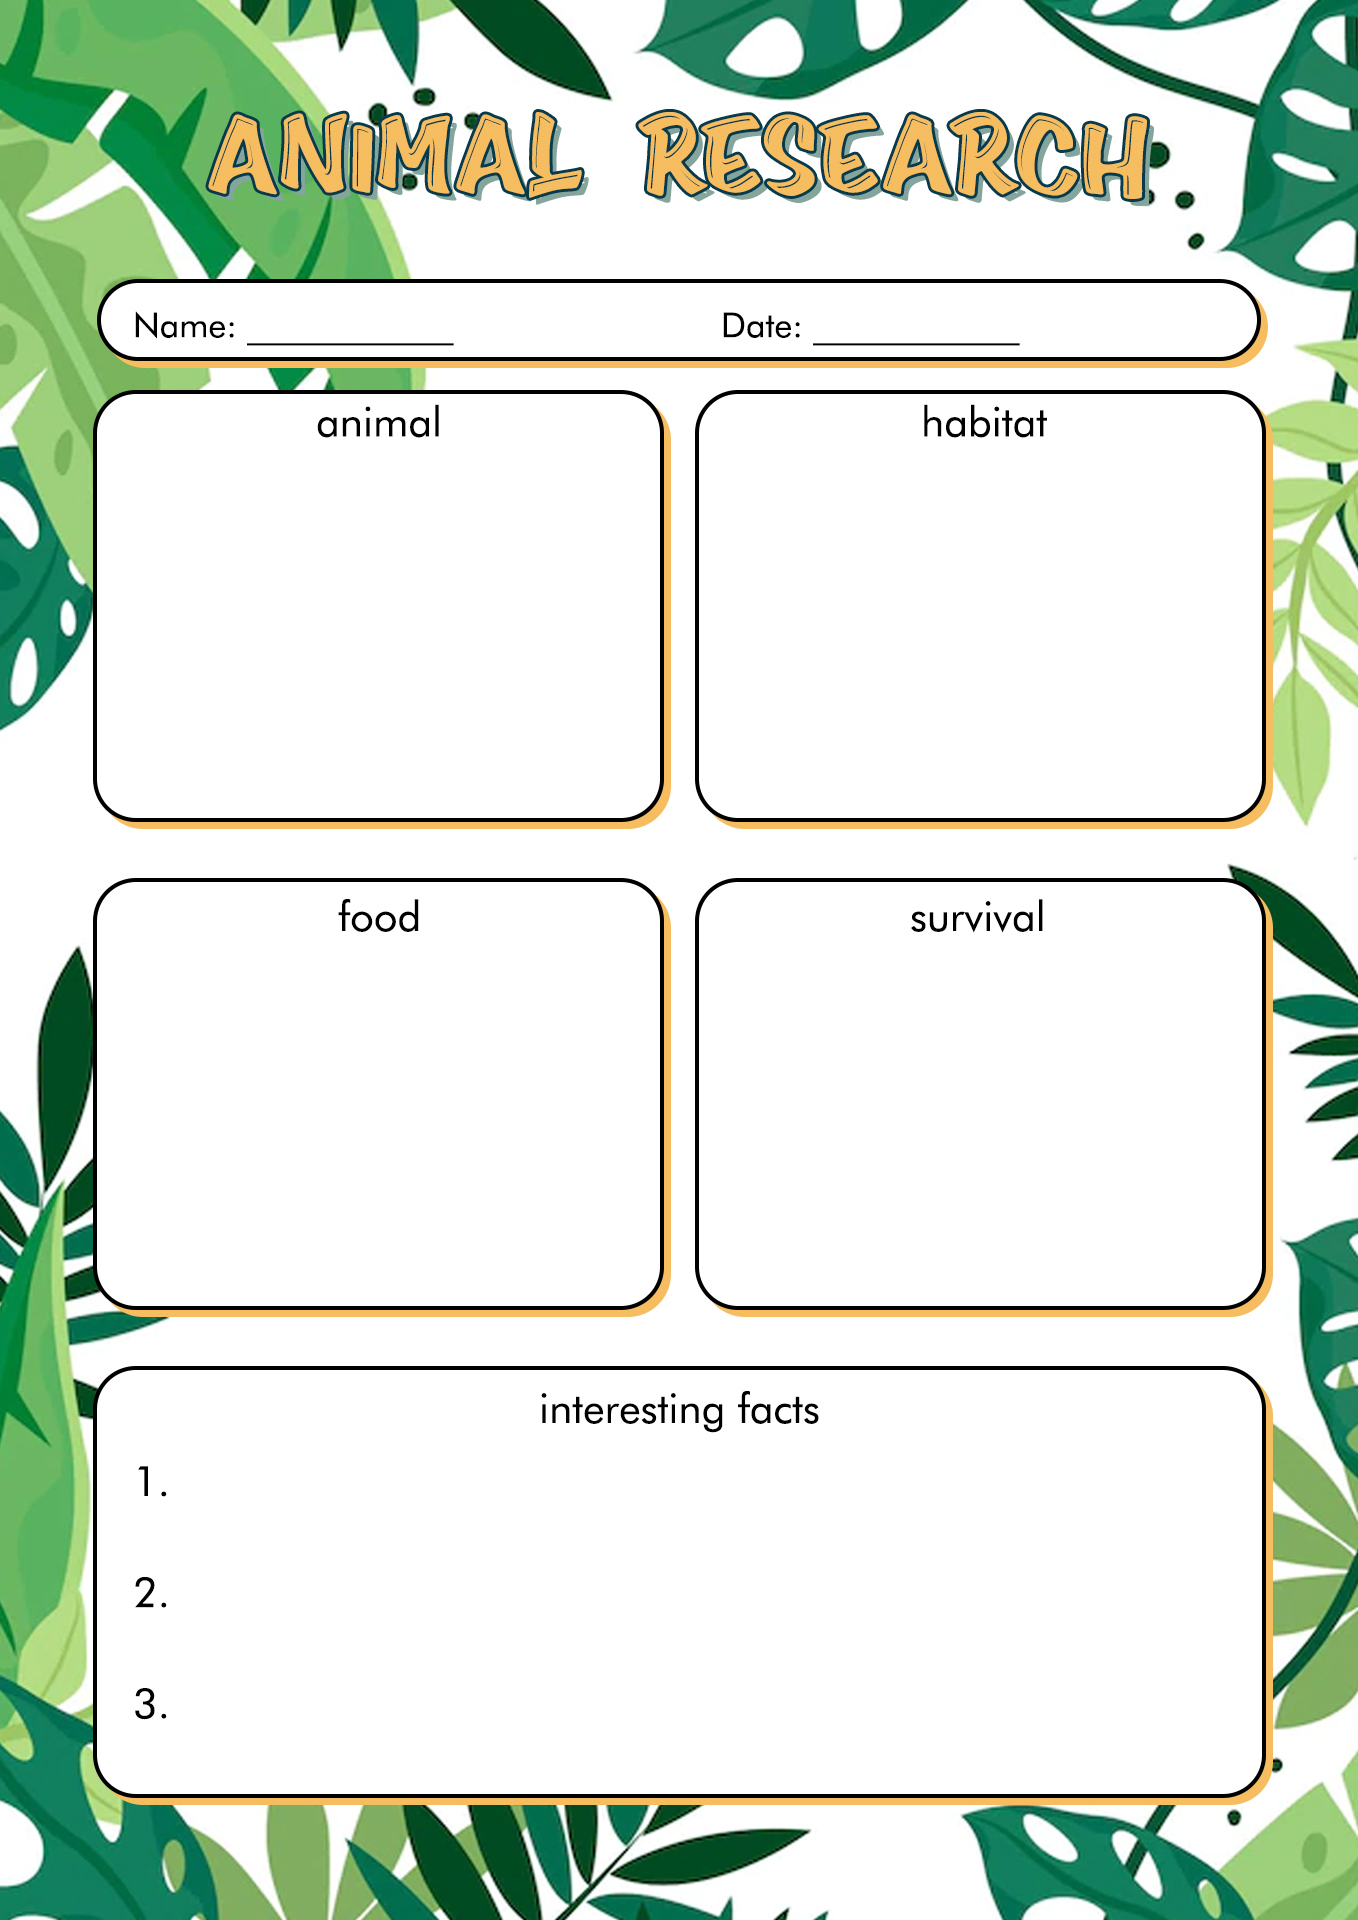 Elementary Animal Research Graphic Organizer Image